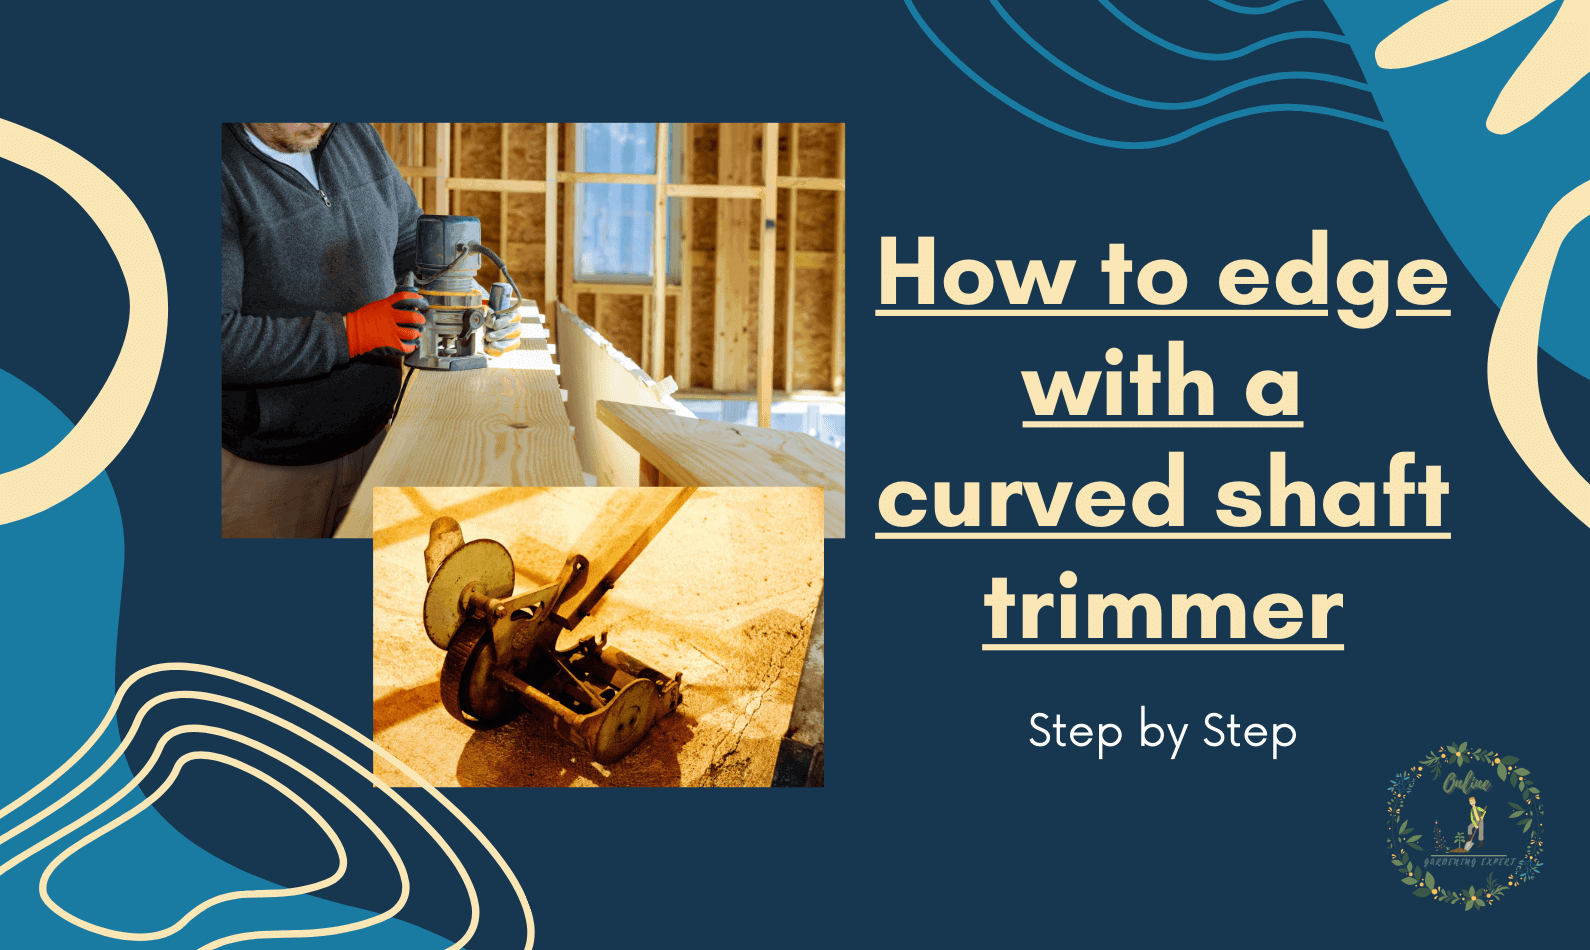 How to Edge with a Curved Shaft Trimmer